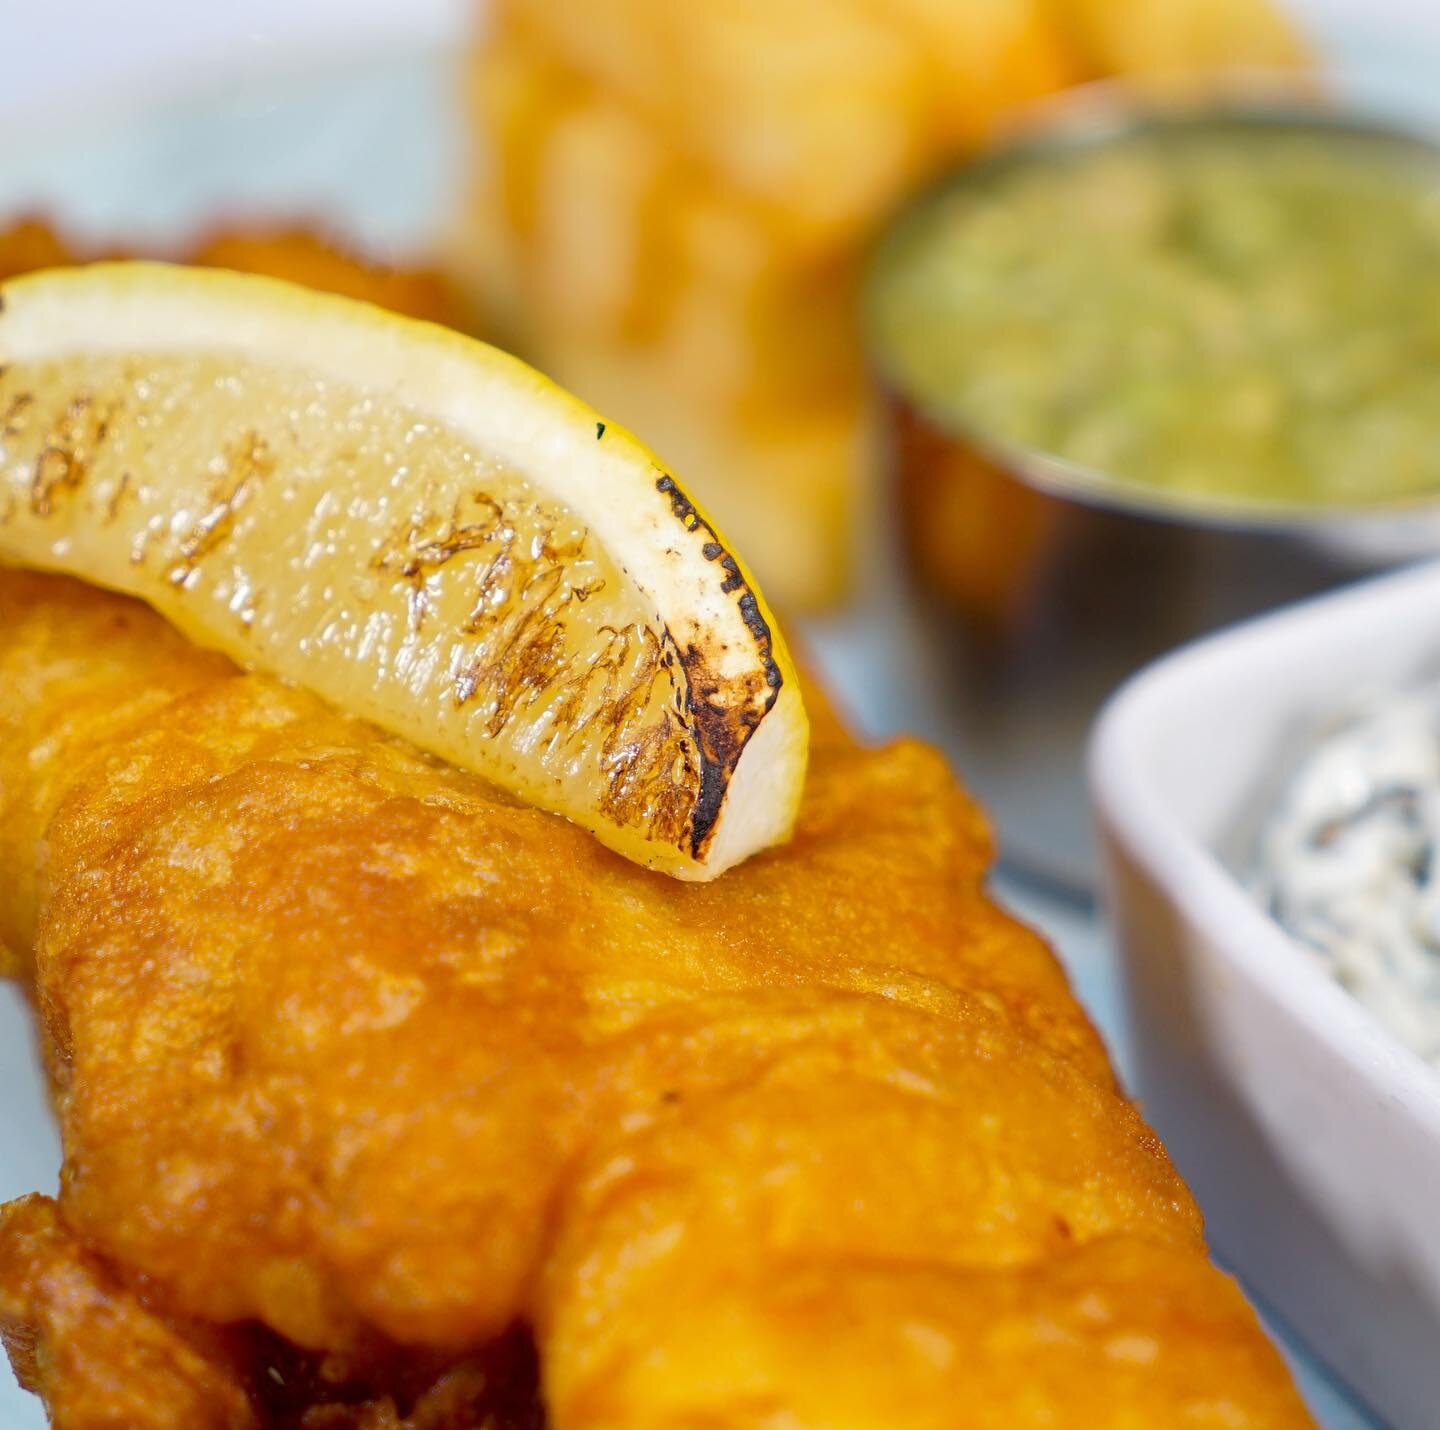 Celebrating National Fish and Chips Day 🐟

Who doesn't like freshly cooked fish and chips?  Well 382 million portions are served in the UK per year - an average of of six servings for every man, woman and child in the country!  Thank you @fishisthed